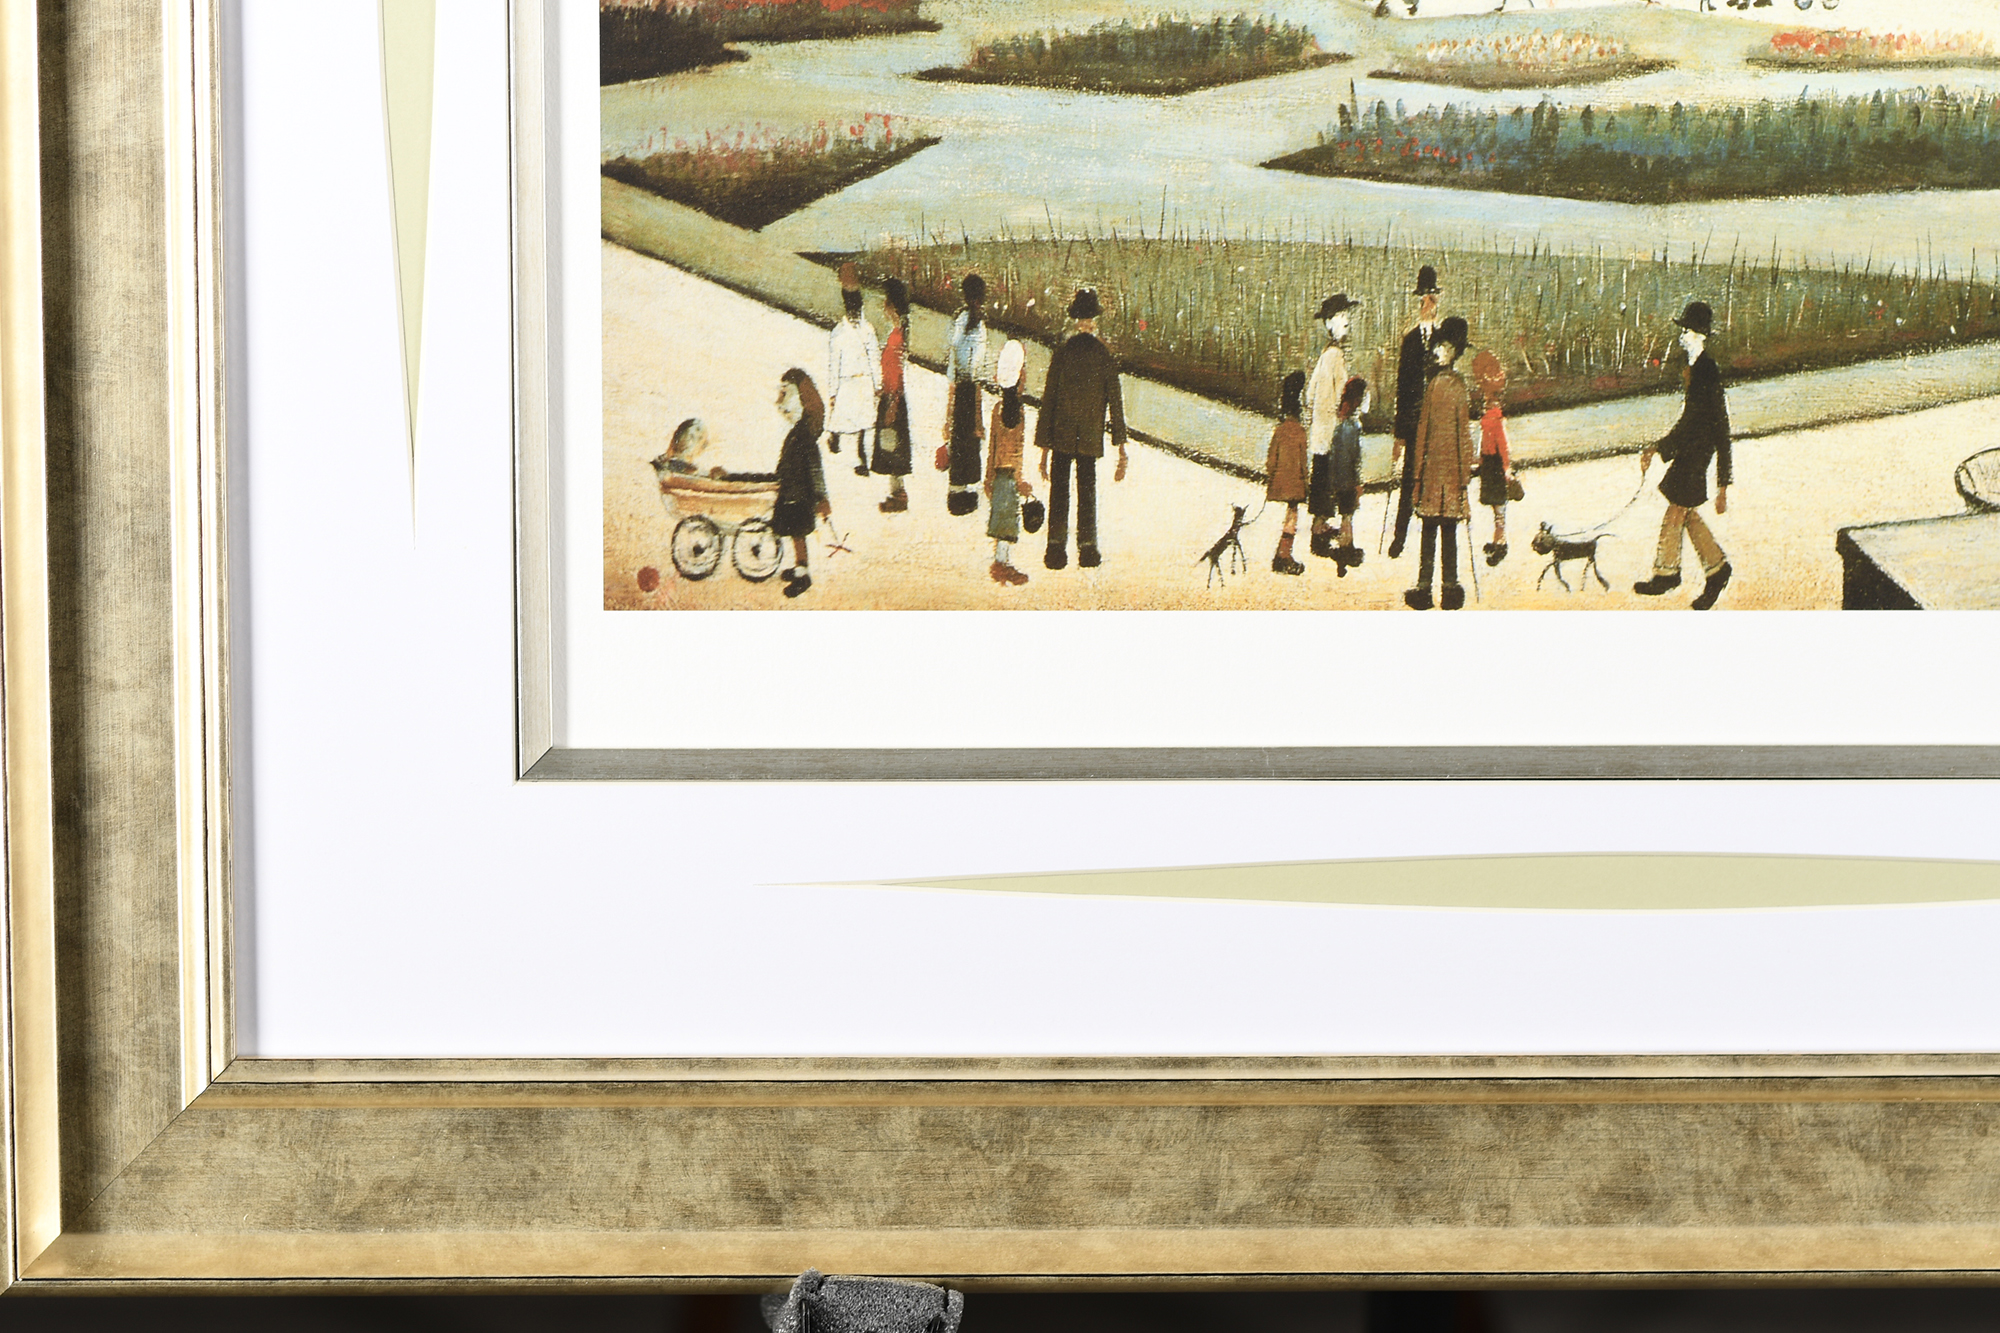 Limited Edition L.S. Lowry "Piccadilly Gardens" Authentication & Embossed Stamped. Mint Condition. - Image 9 of 10